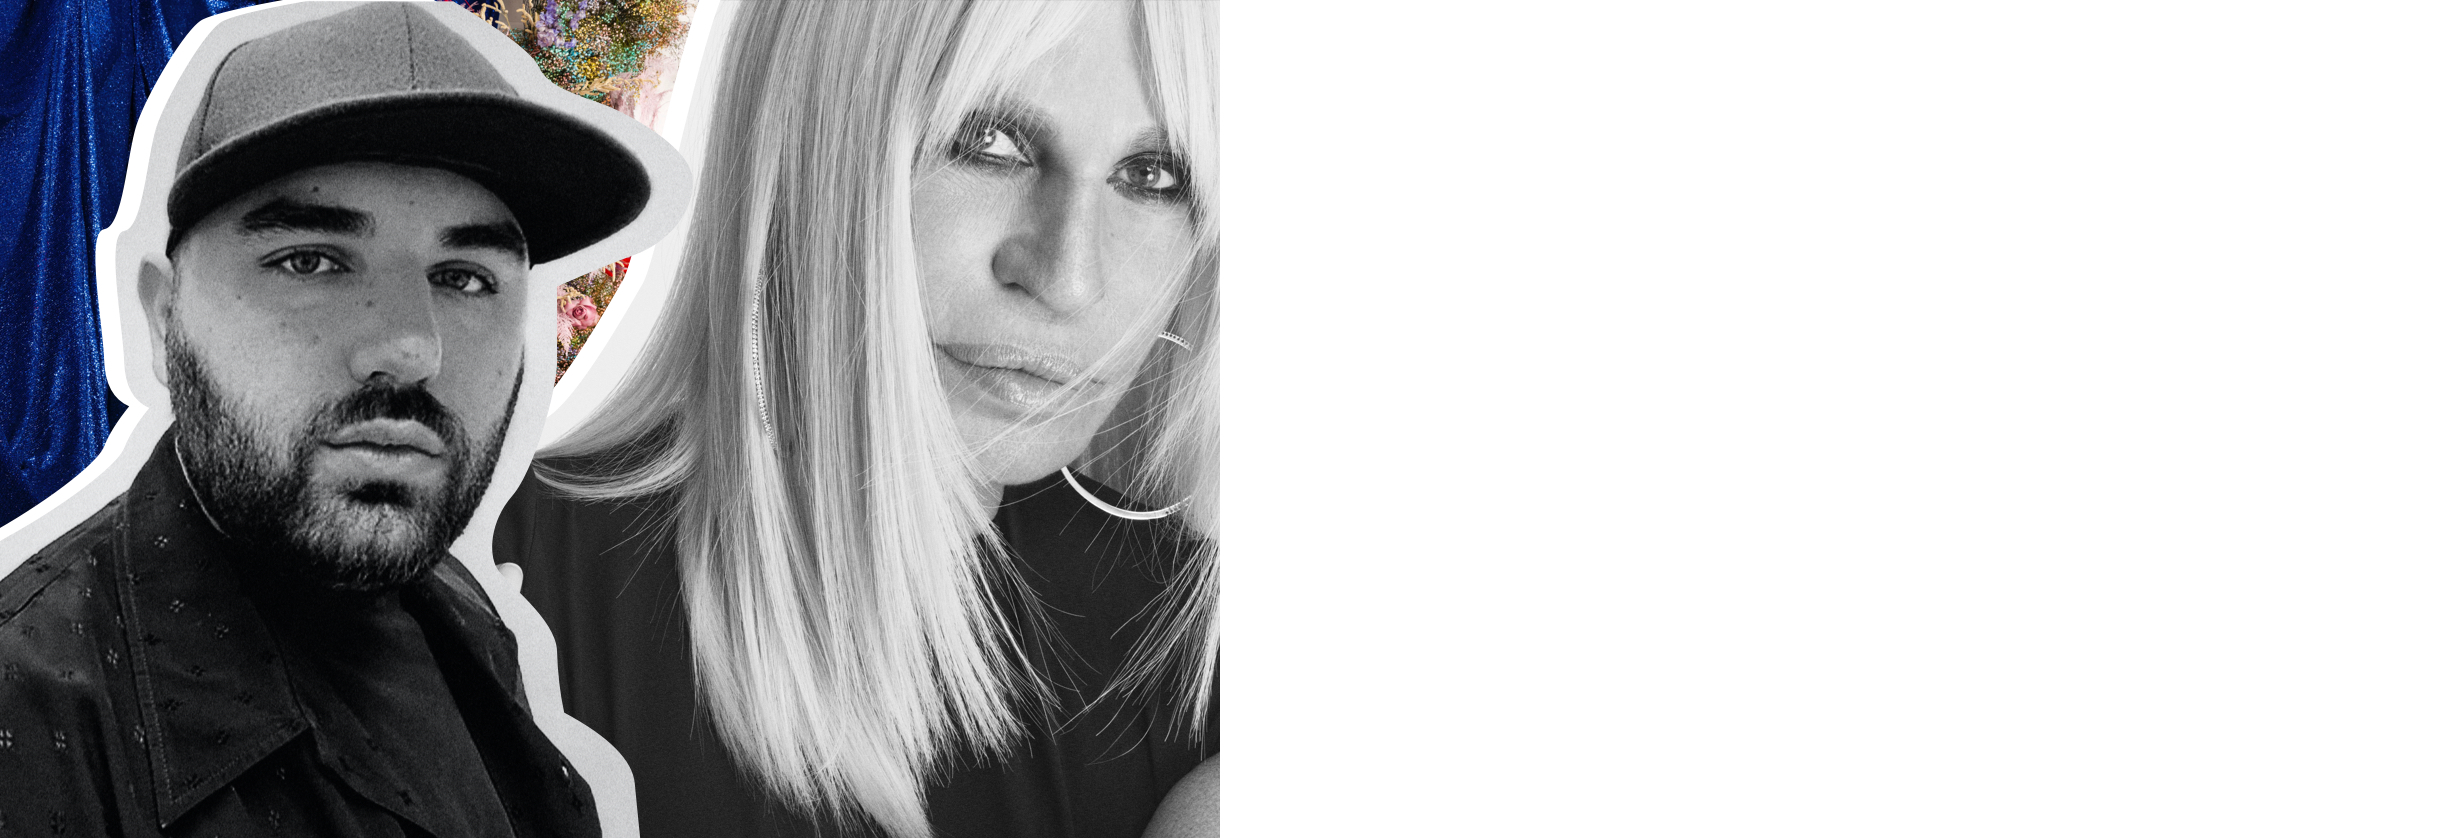 Donatella Versace interview: 'I want the company to stay forever